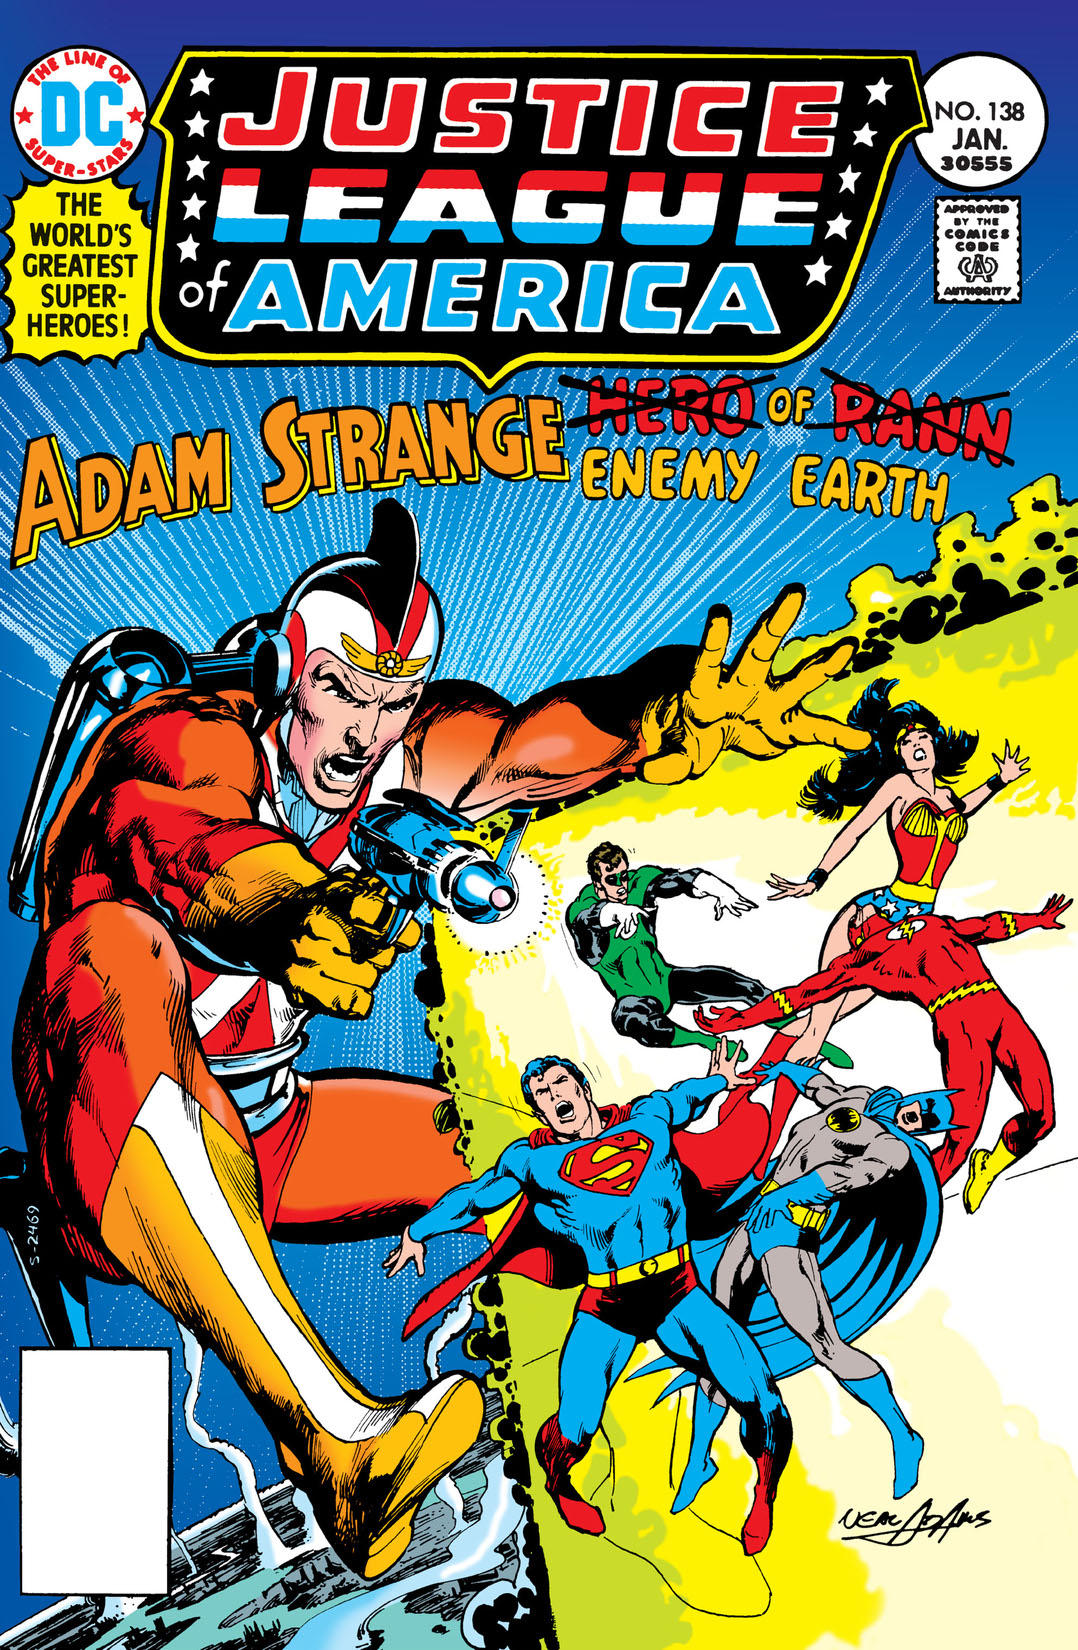 Justice League of America (1960-) #138 preview images